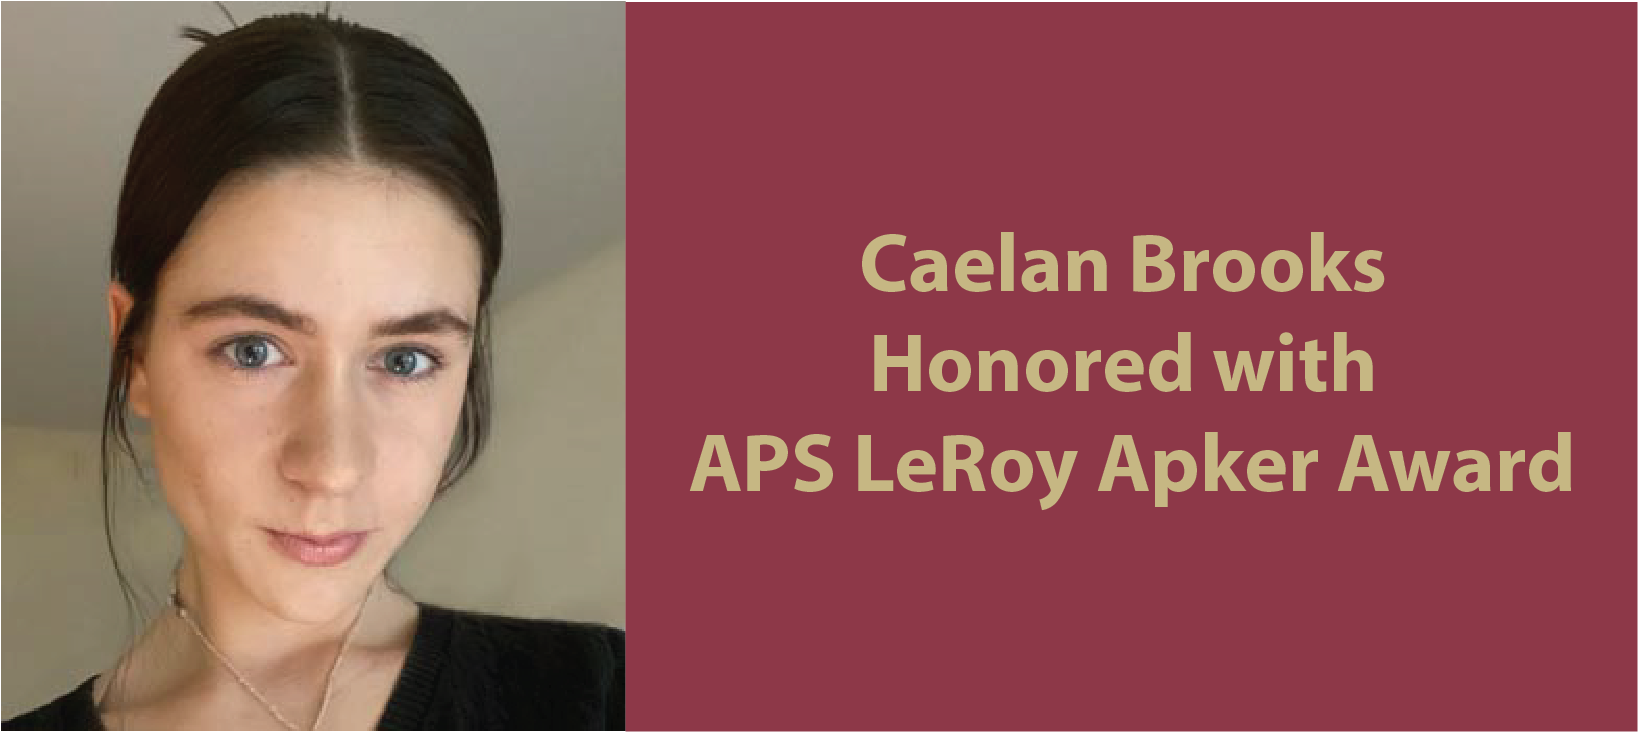 Image of Caleen Brooks with graphical text "Caelan Brooks honored with APS LeRoy Apker Award"